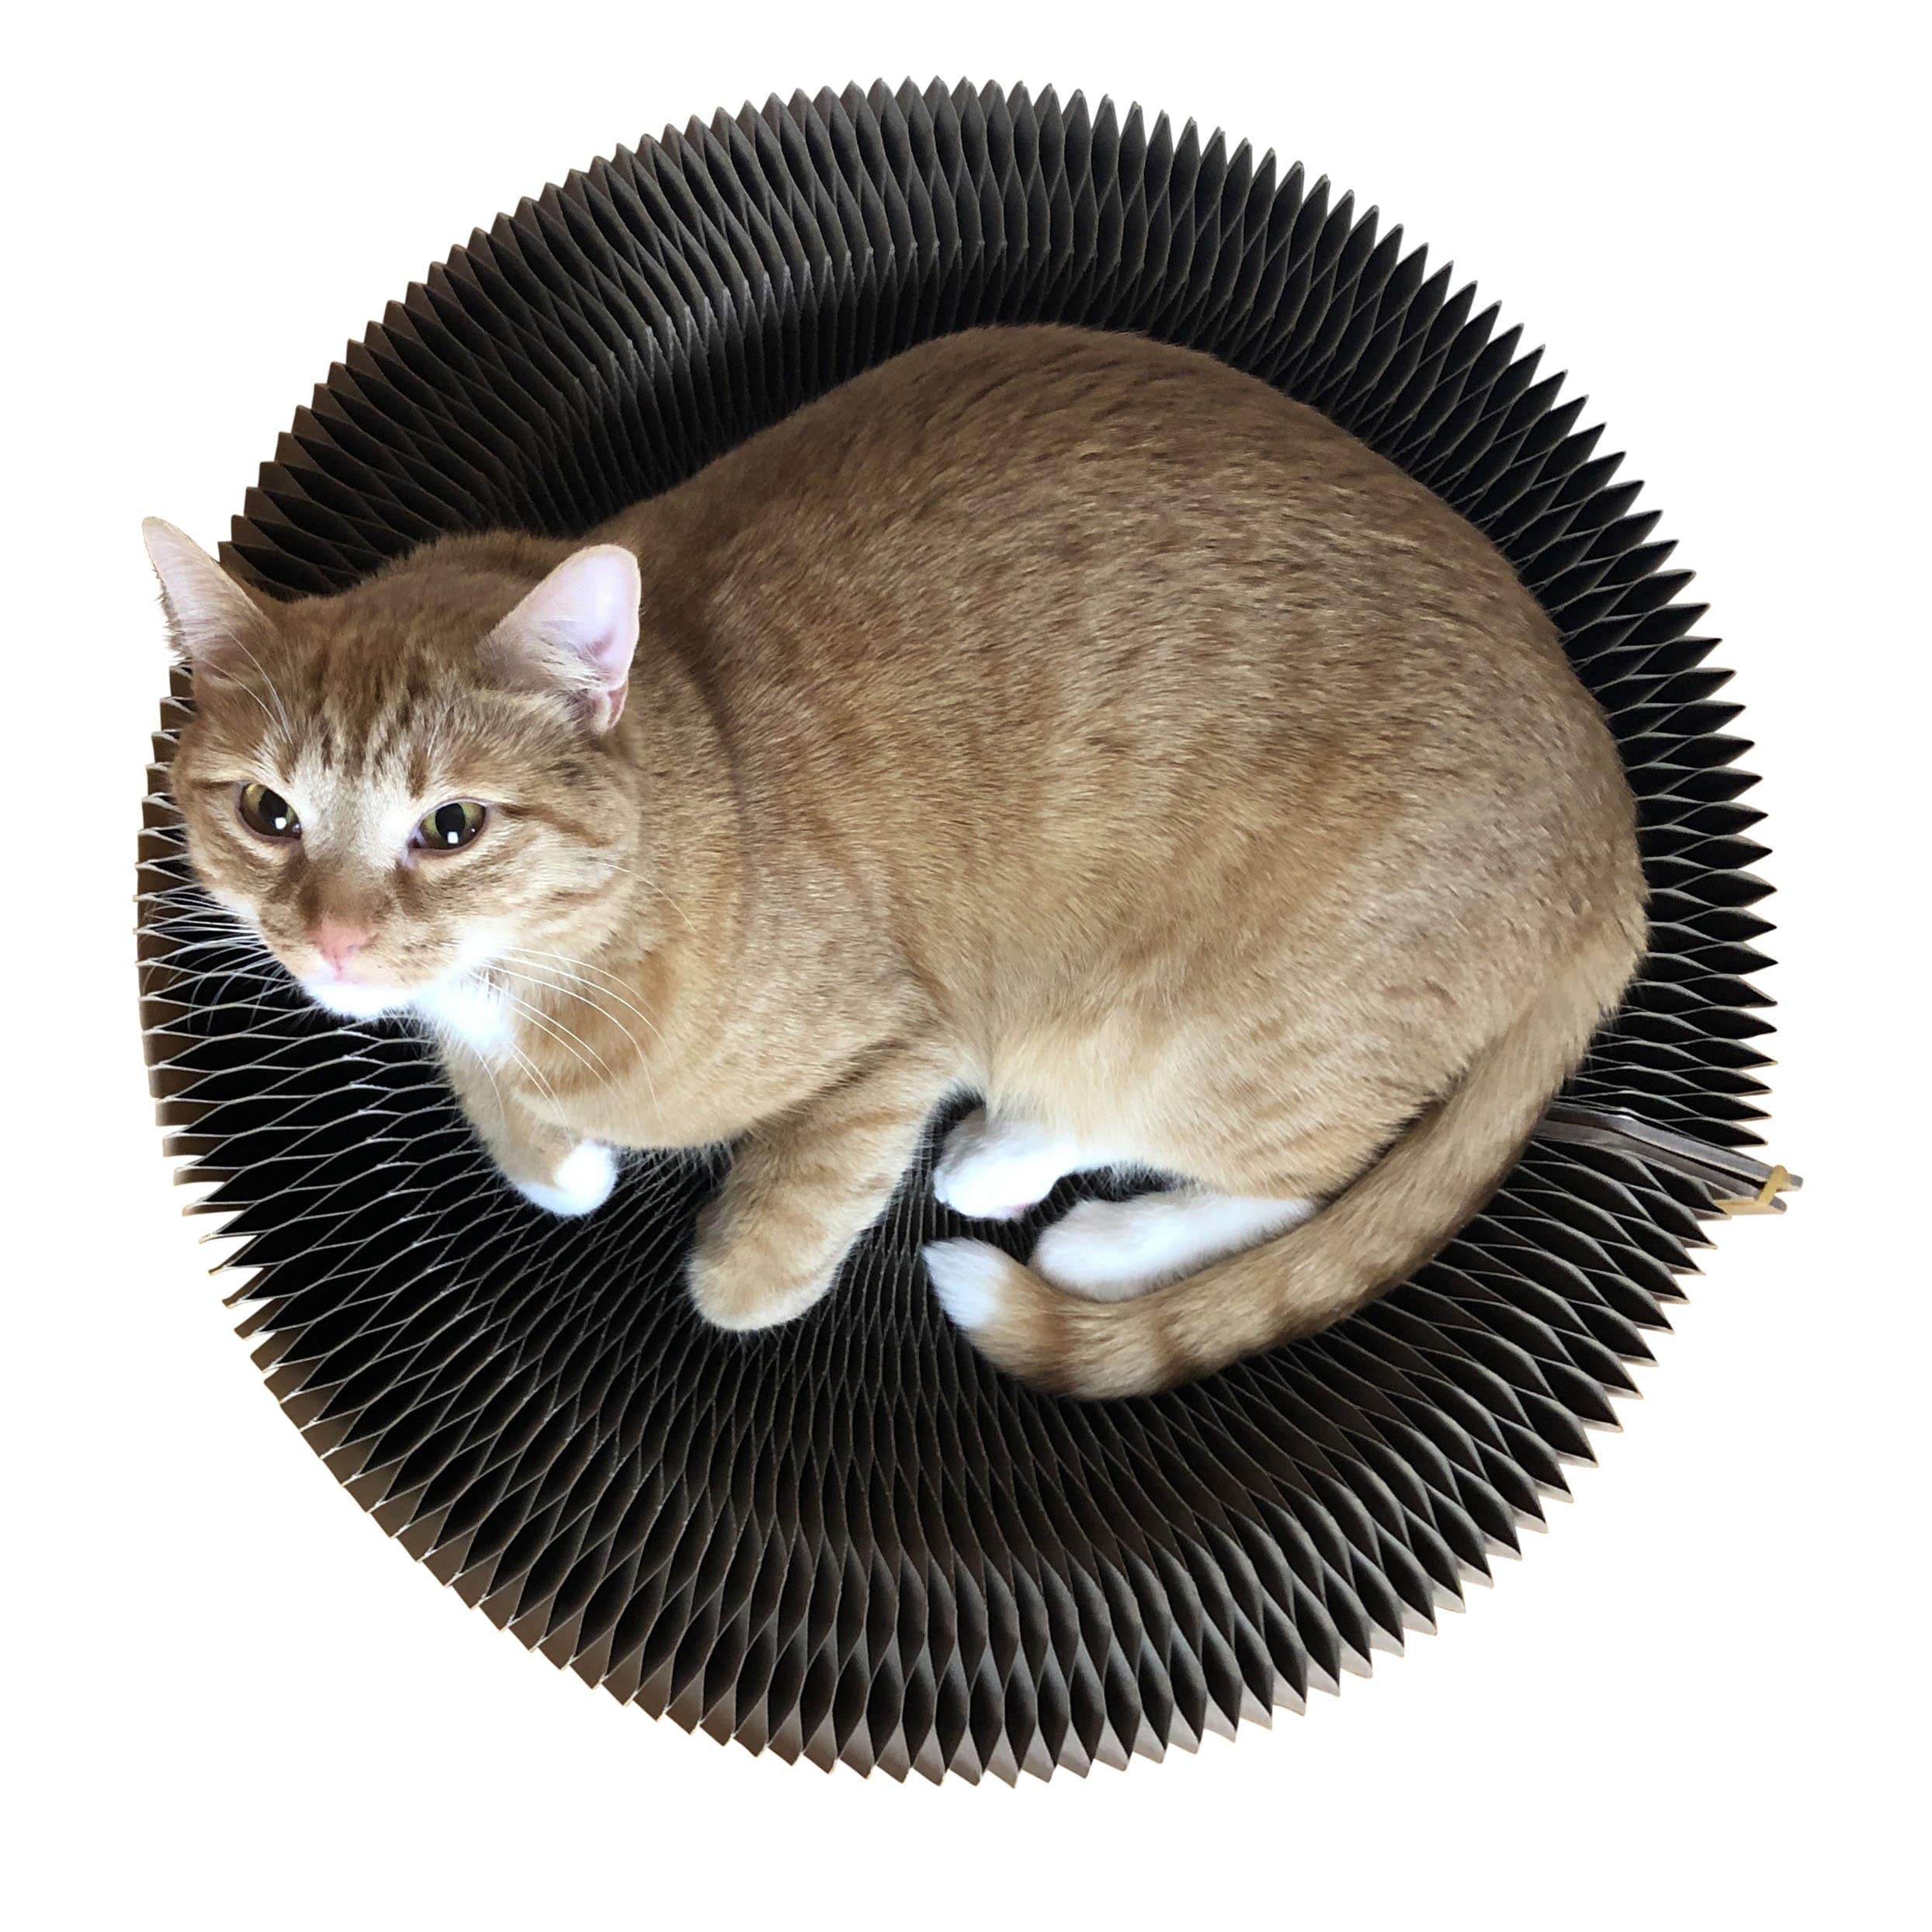 "The Accordion" Travel Cardboard Bed & Scratcher